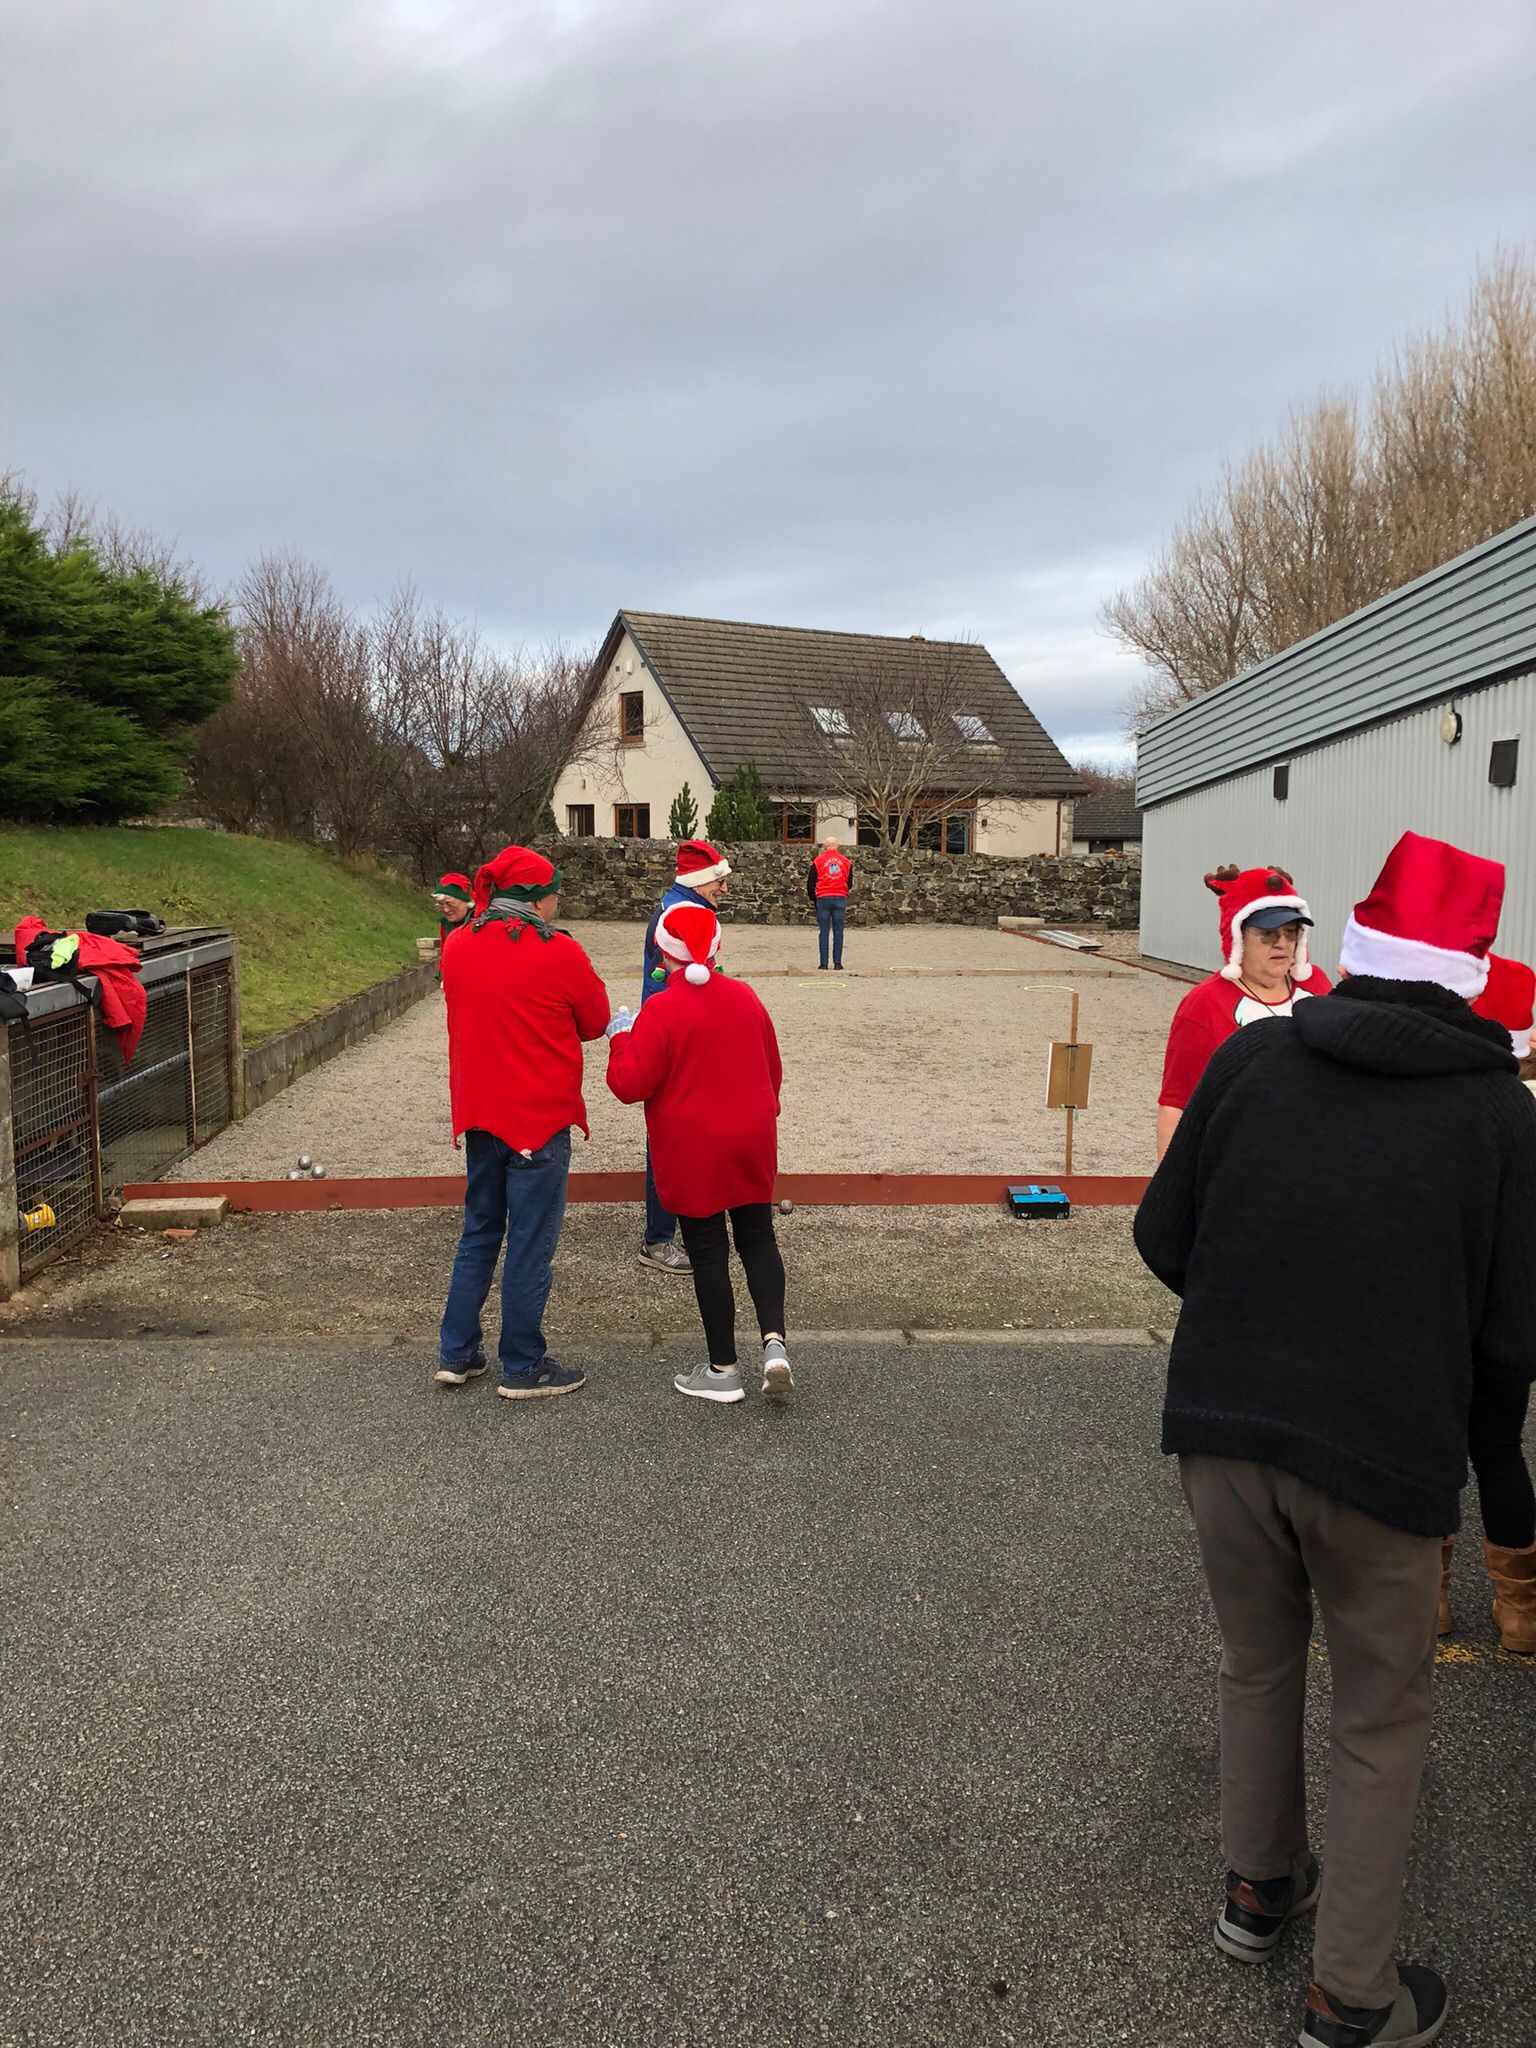 Club members playing Petanque with Santa hats on.